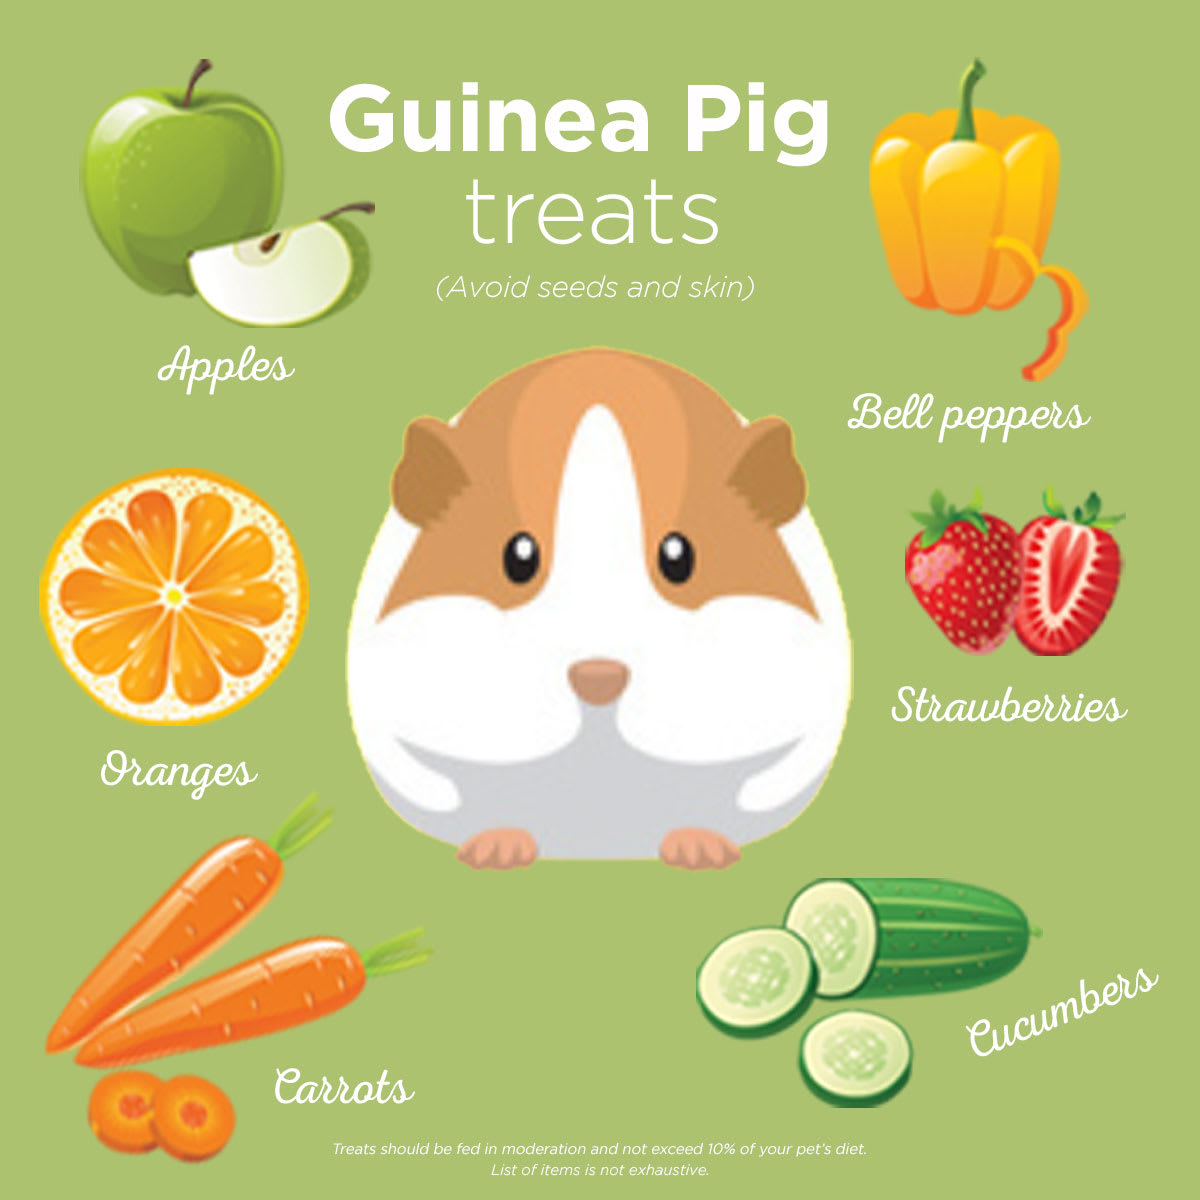 How much vegetables can guinea pigs eat?